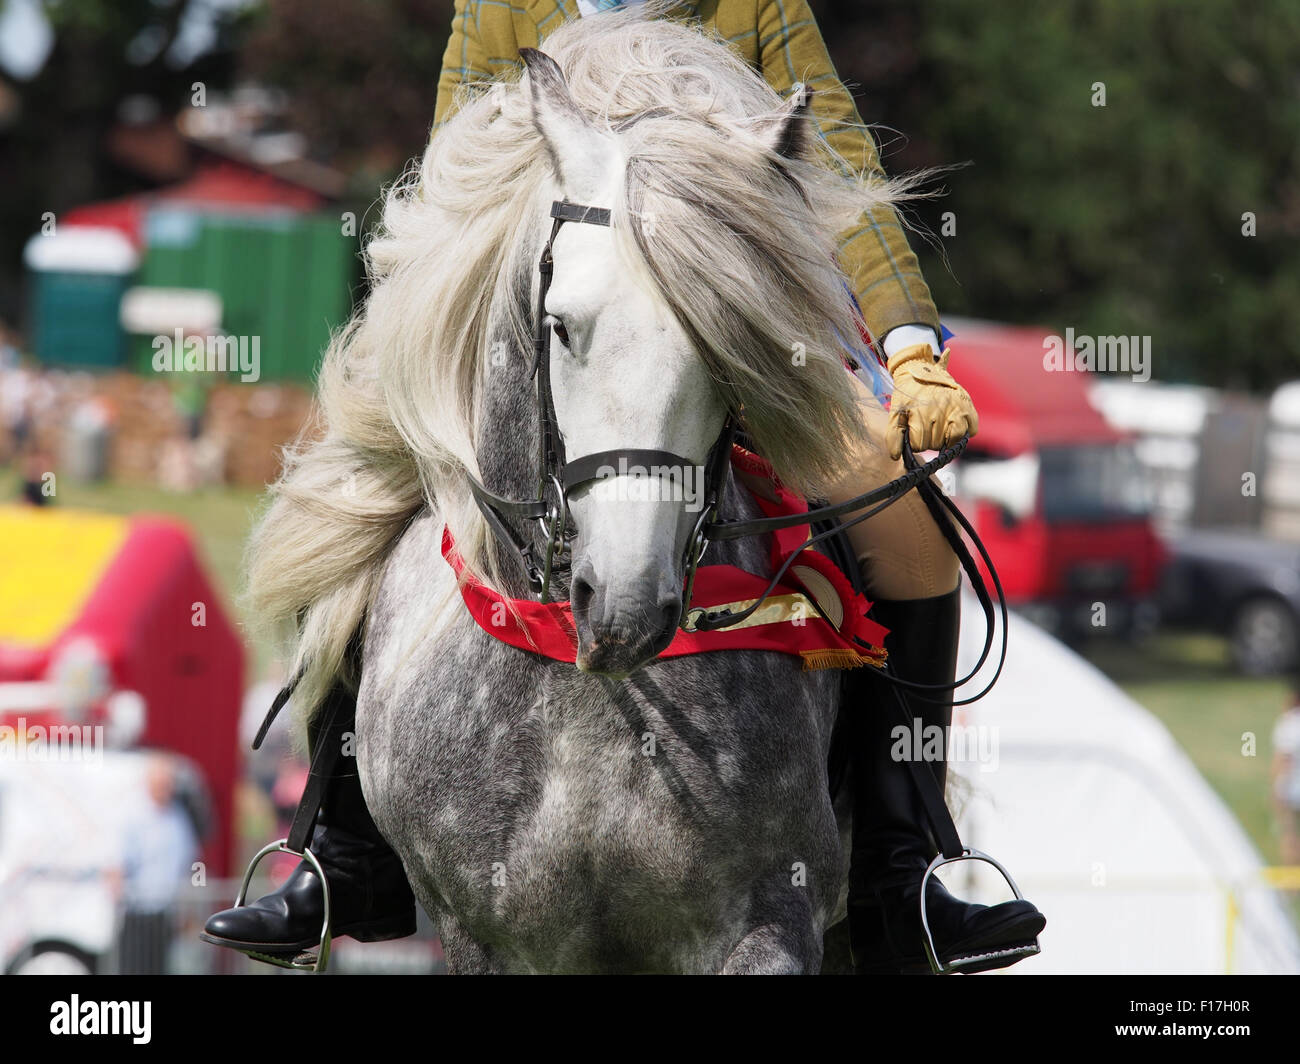 Sedgefield, England - 8th August 2015: Champion Horse at the Sedgefield show Stock Photo